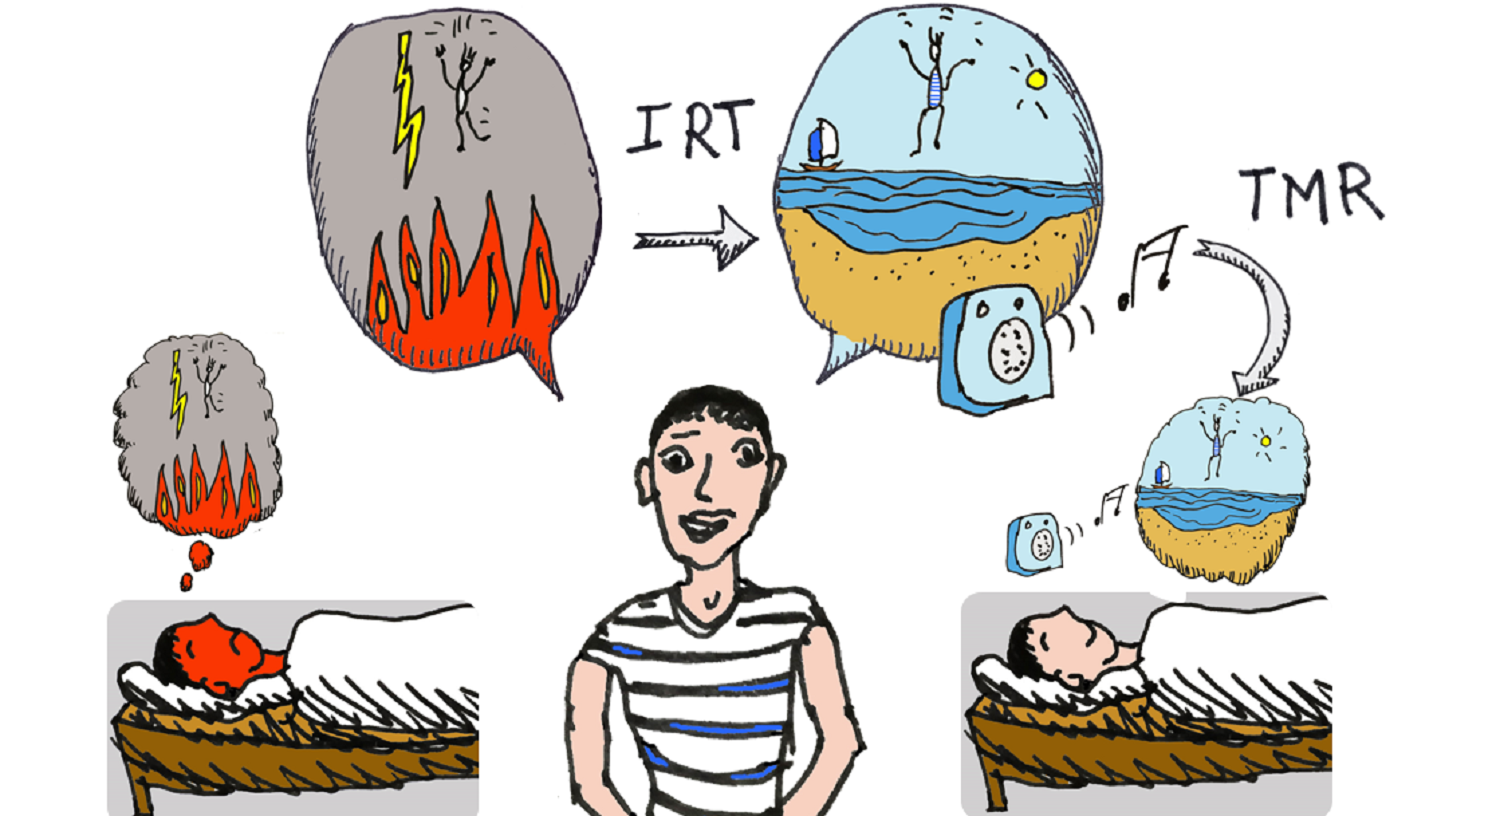 Person in a striped shirt connecting memories and sounds to dreams and nightmares in a sleep study illustration